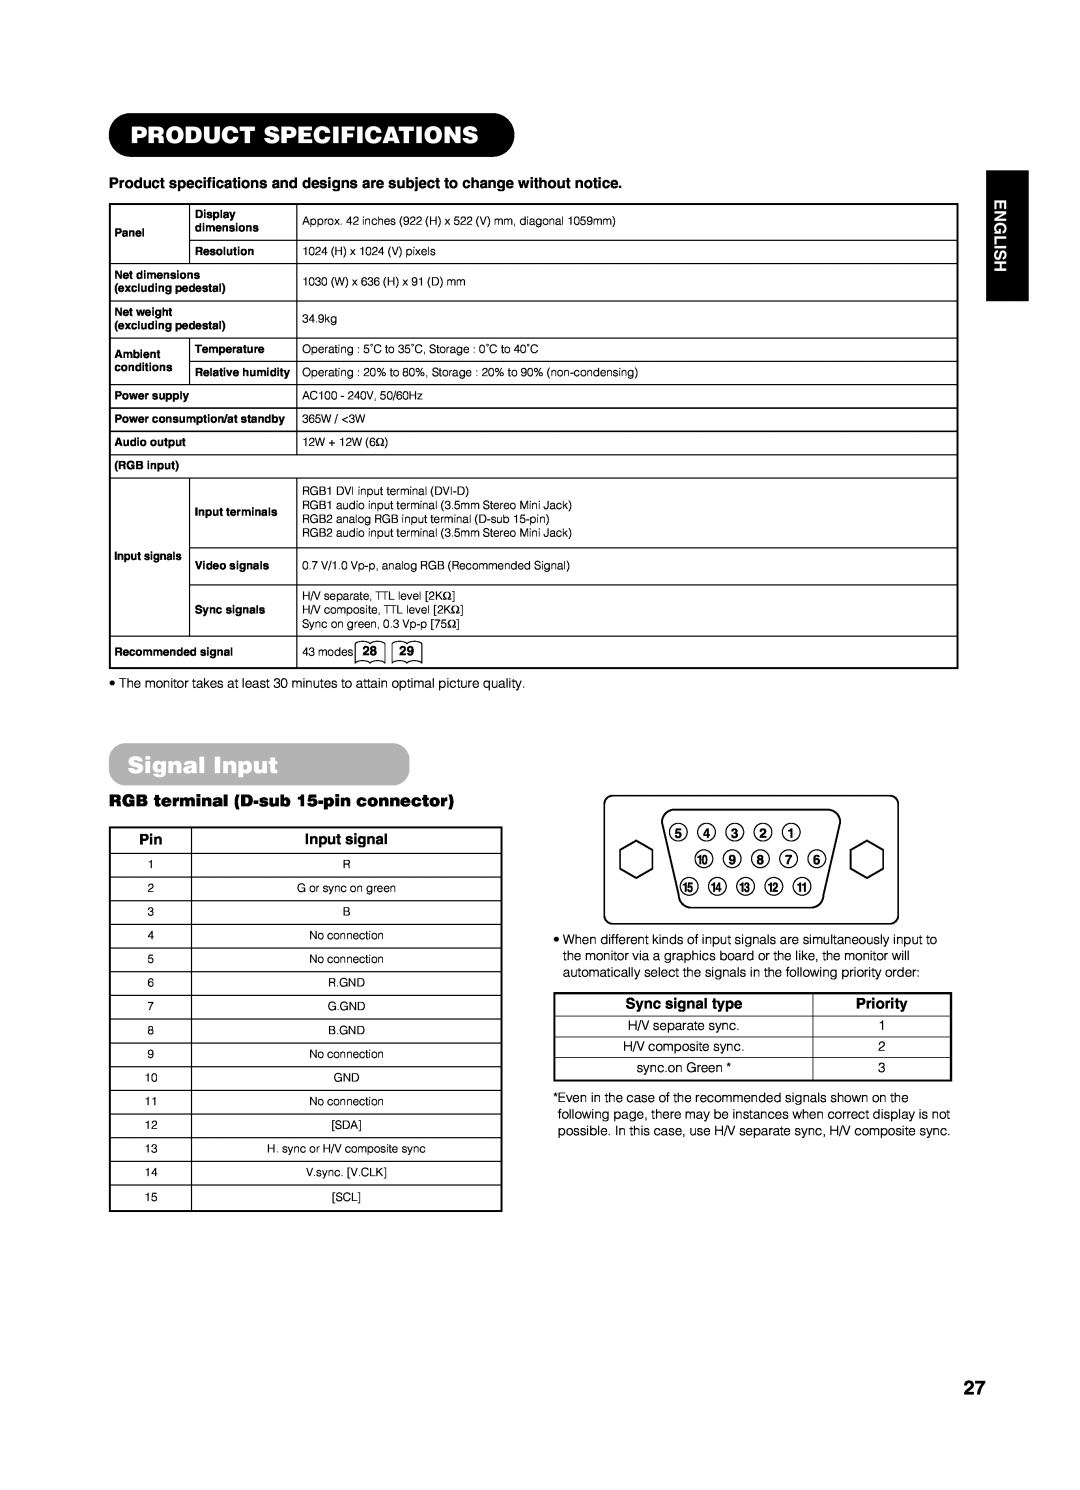 Yamaha PDM-4210E user manual Product Specifications, Signal Input, English, RGB terminal D-sub 15-pin connector 